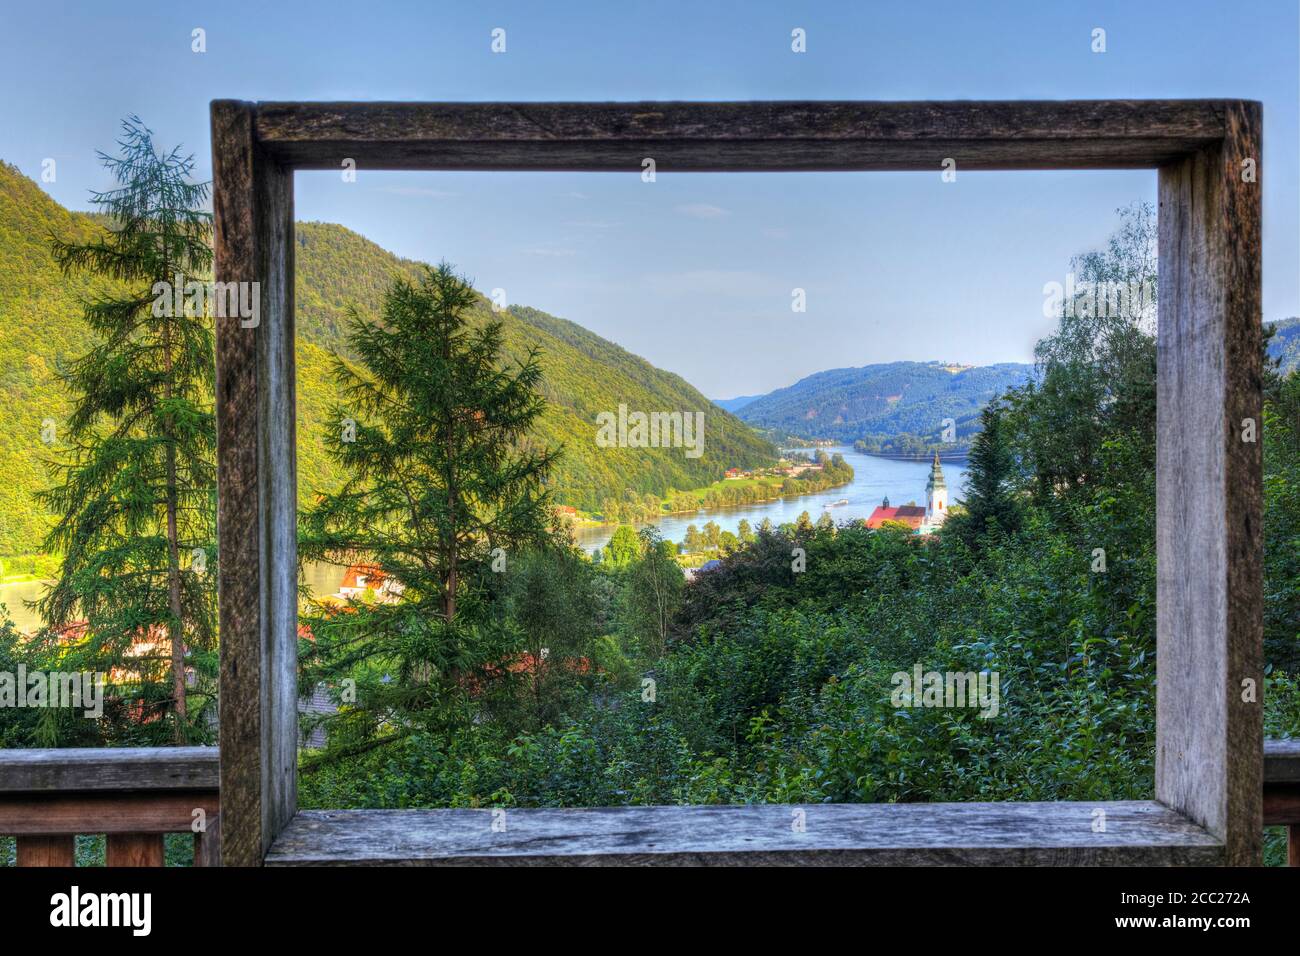 Austria, View of Engelszell Abbey at Danube River through frame Stock Photo